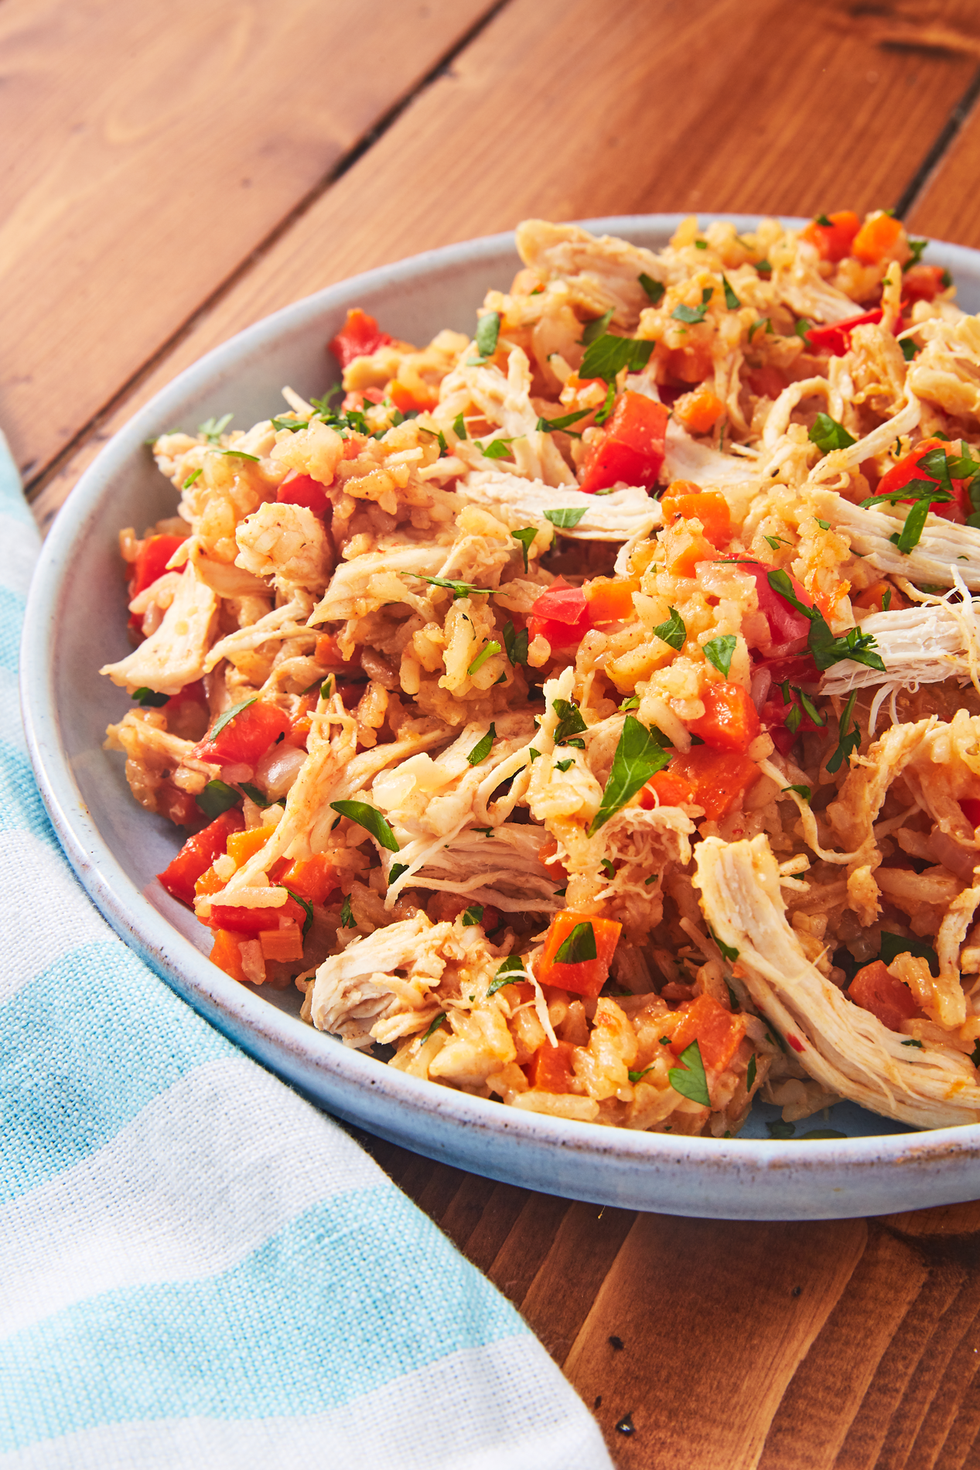 https://hips.hearstapps.com/hmg-prod/images/190508-instant-pot-chicken-and-rice-vertical-2-1558017055.png?crop=0.9997369113391213xw:1xh;center,top&resize=980:*